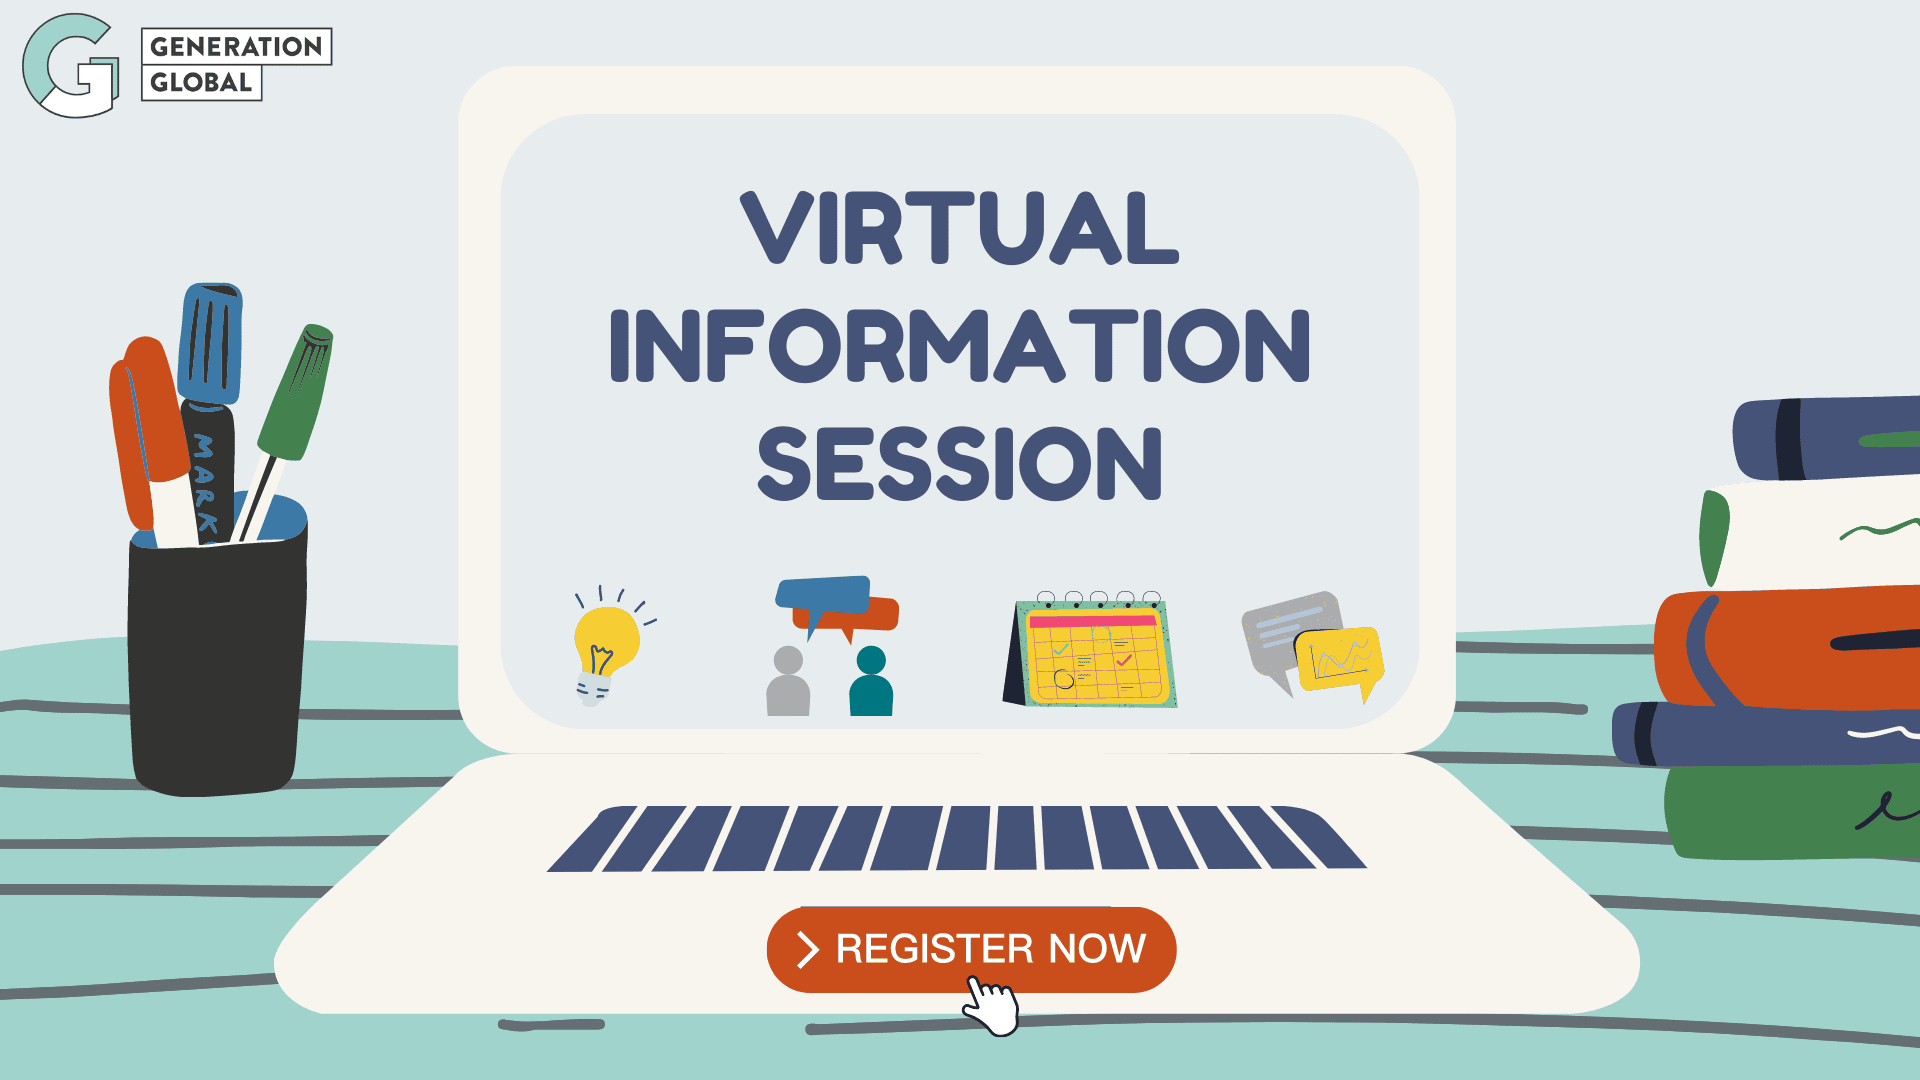 Join a Virtual information session to learn more about Generation Global